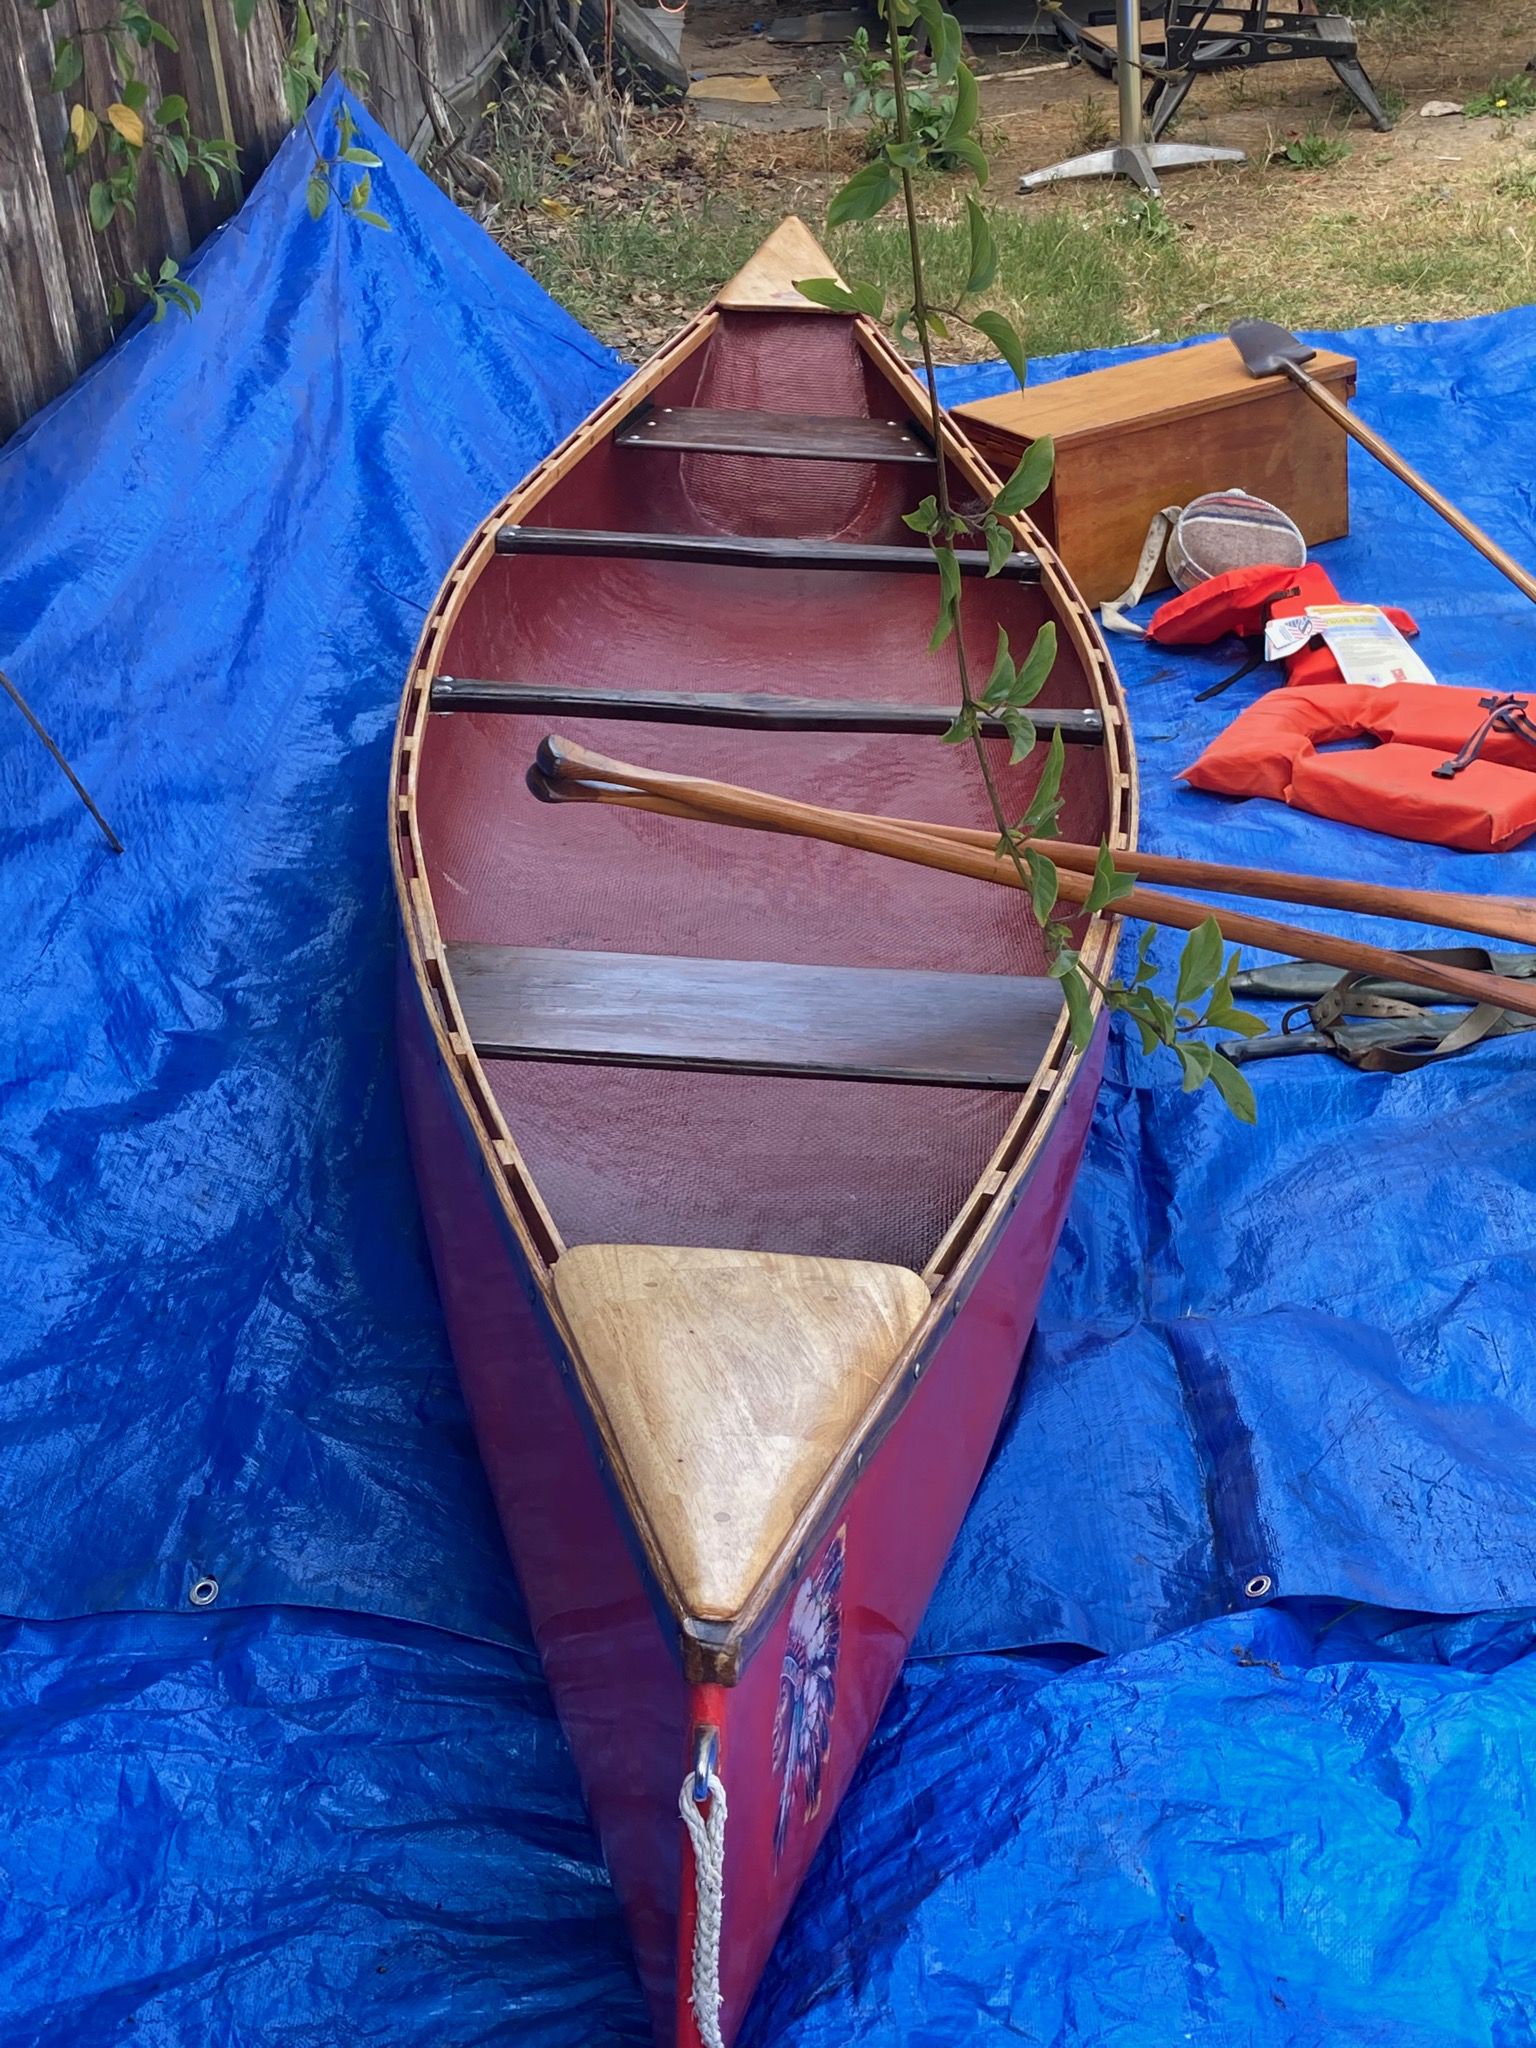 1967 Old Town 12", "Classic" style canoe